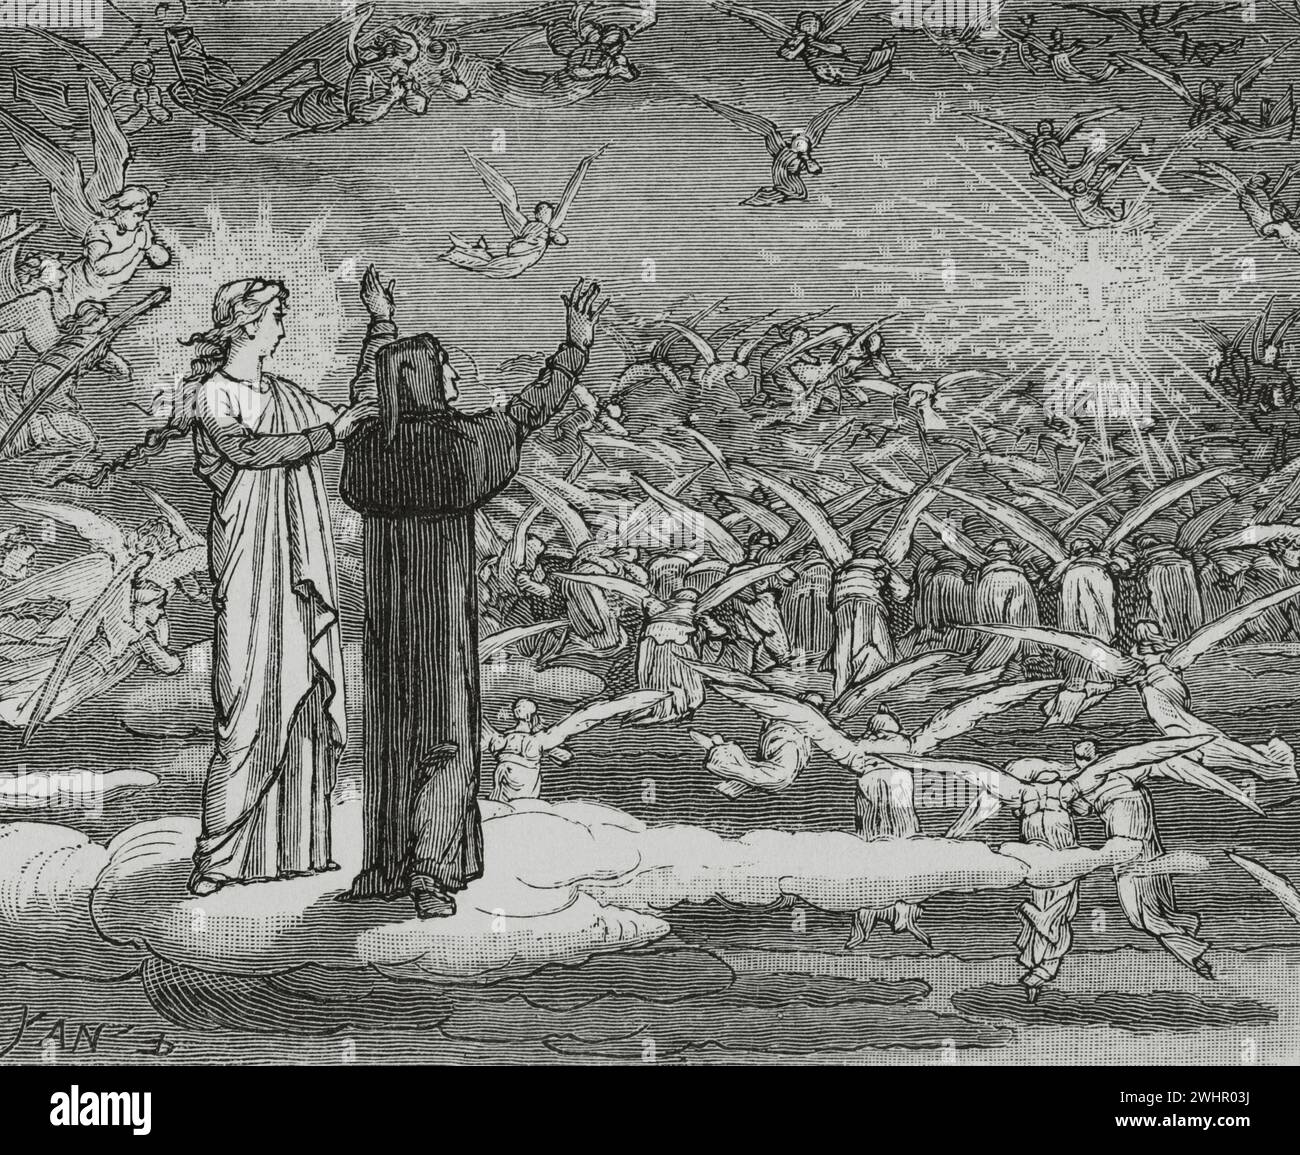 The Divine Comedy (1307-1321). Italian narrative poem by the Italian poet Dante Alighieri (1265-1321). The Paradise. 'Oh true sparkle of the Holy Ghost...' Illustration by Yann Dargent (1824-1899). Engraving. Published in Paris, 1888. Stock Photo